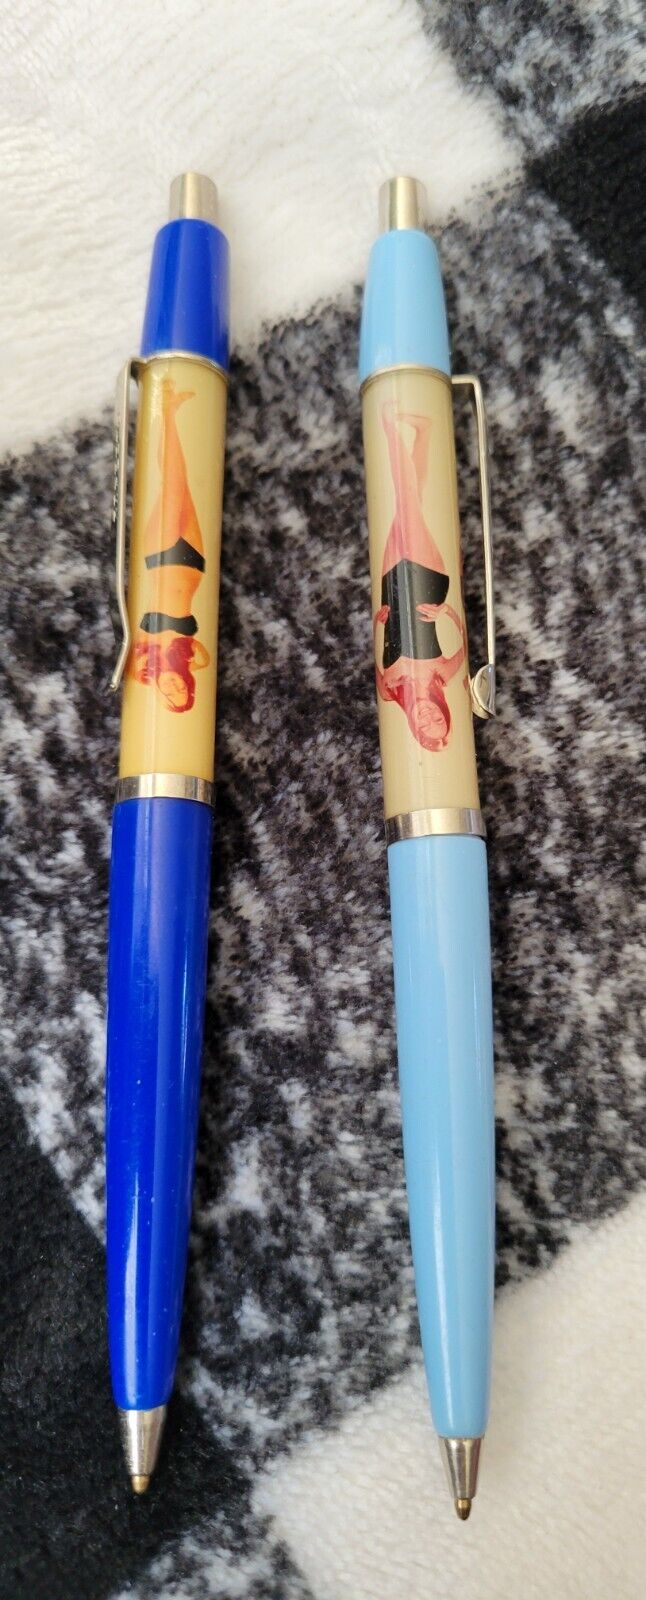 VINTAGE FLOATY PEN NUDE MAN & WOMAN ON 1 PEN & WOMAN ON OTHER 1 THE SET of 2